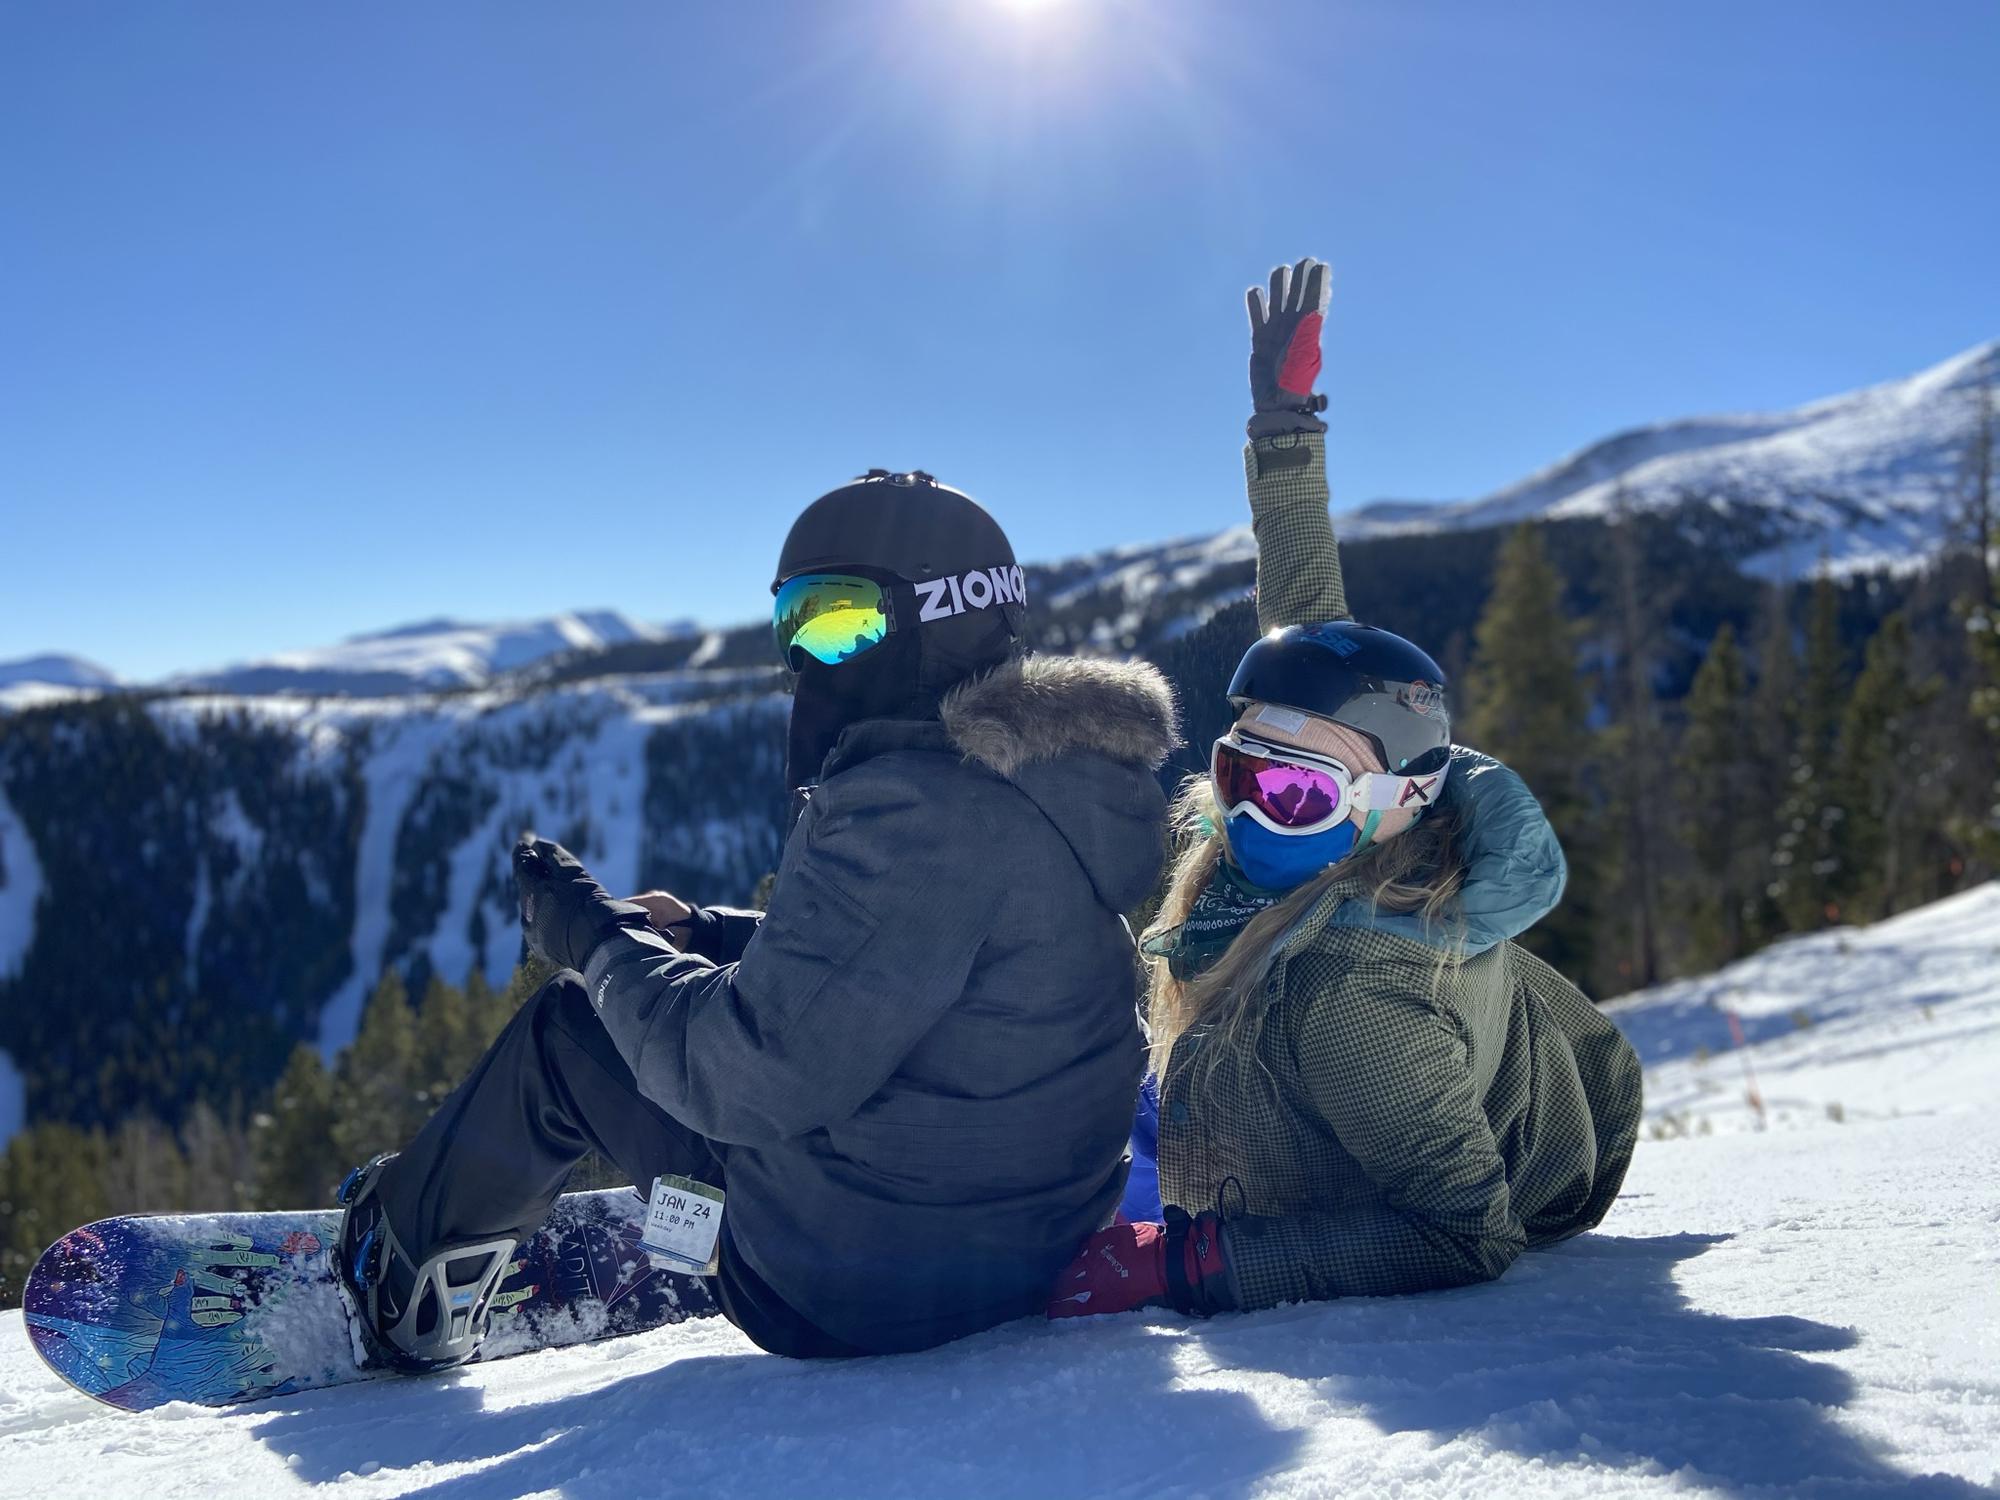 This is one of many photos of Grant & Mary’s snowboarding adventures in CO!